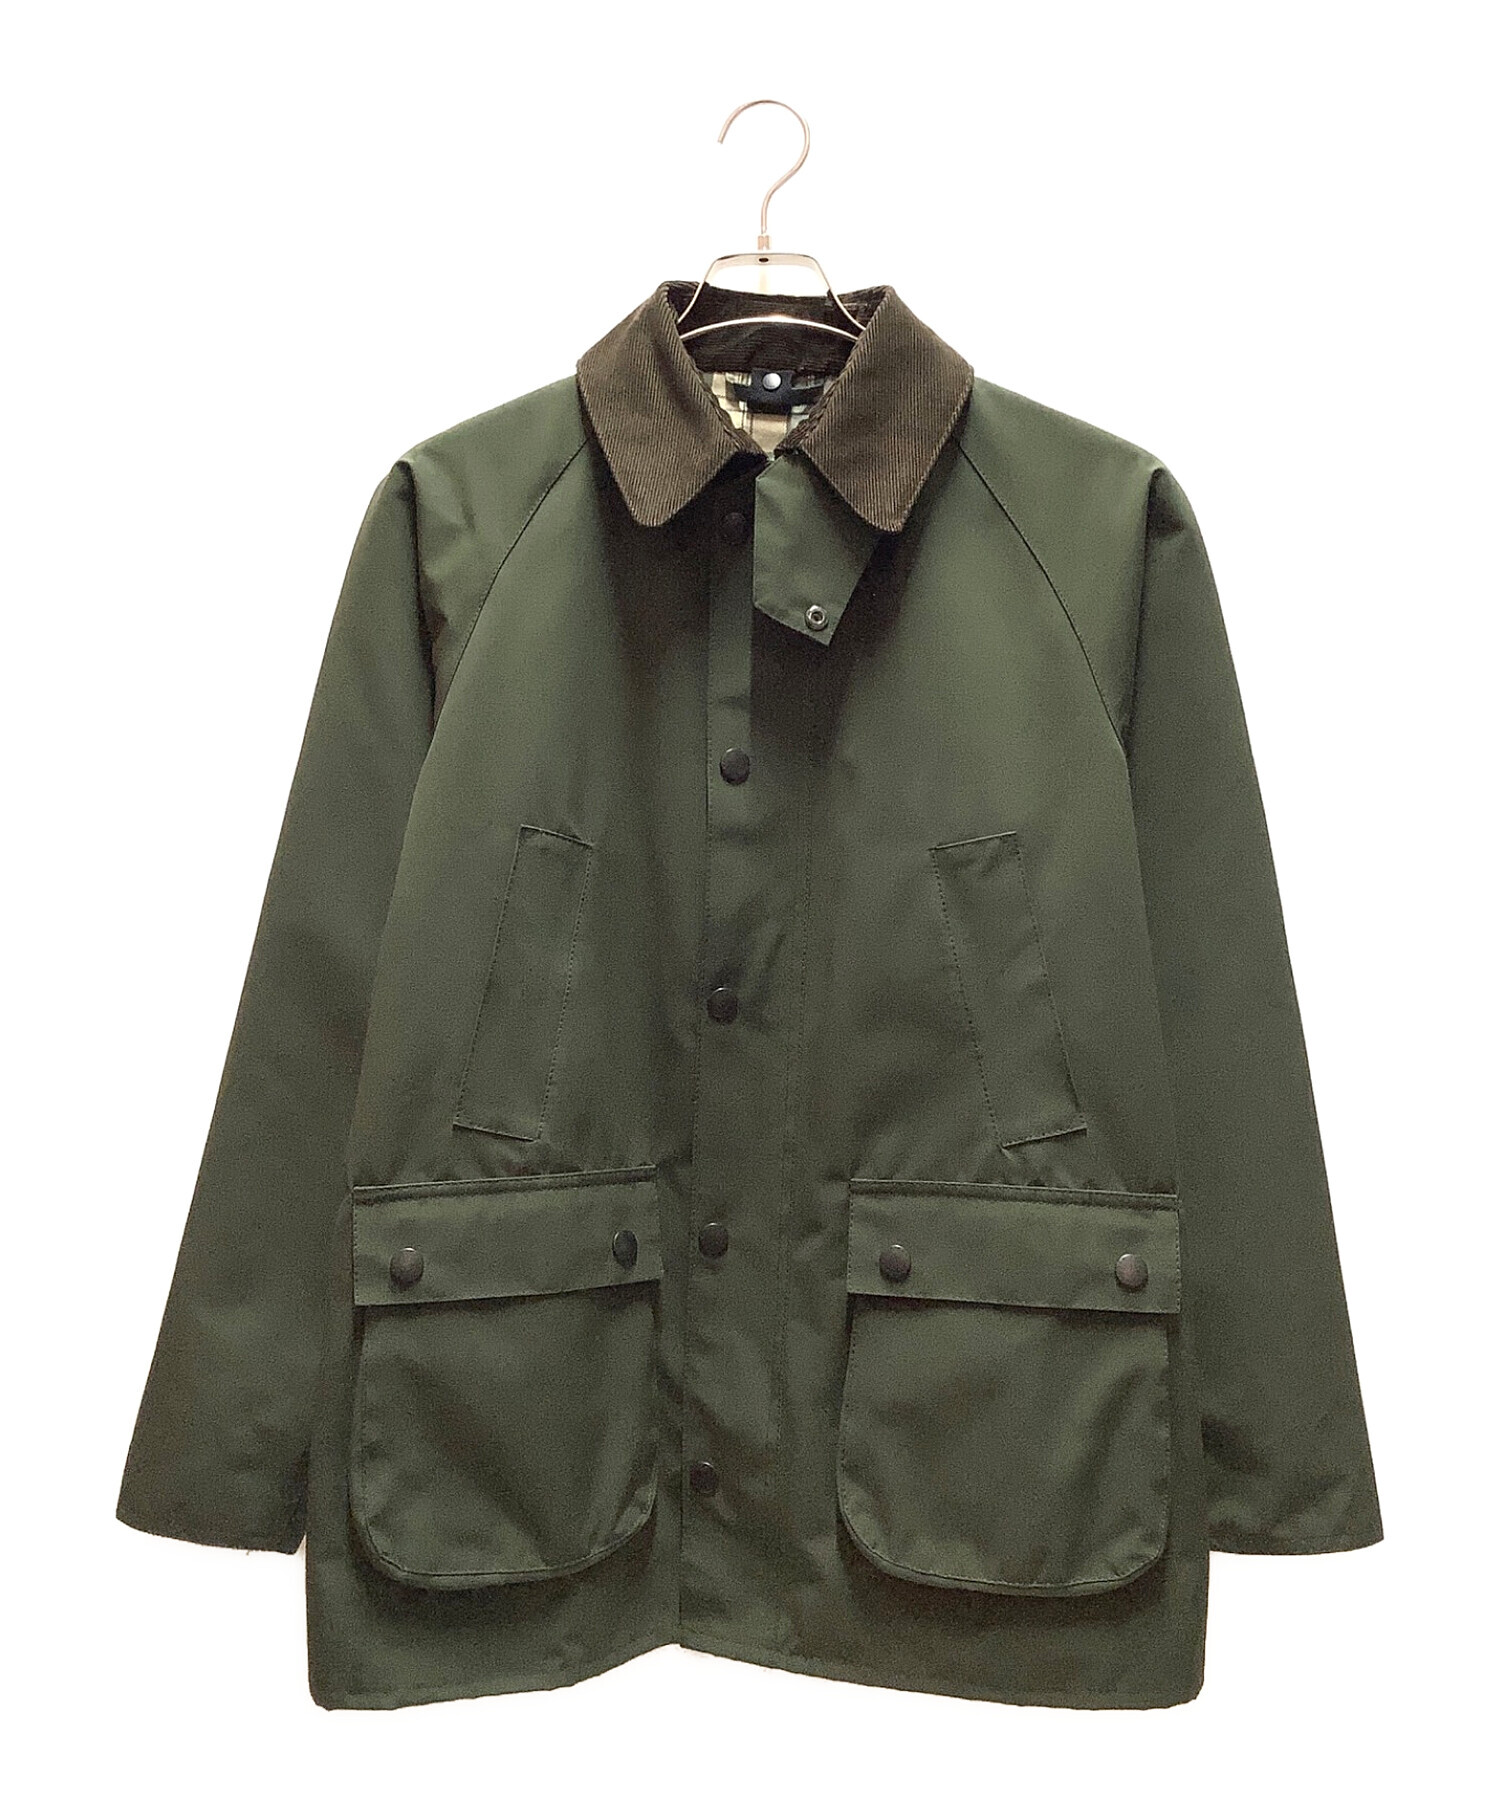 Barbour (バブアー) BEDALE SL 2LAYER JACKET カーキ サイズ:38